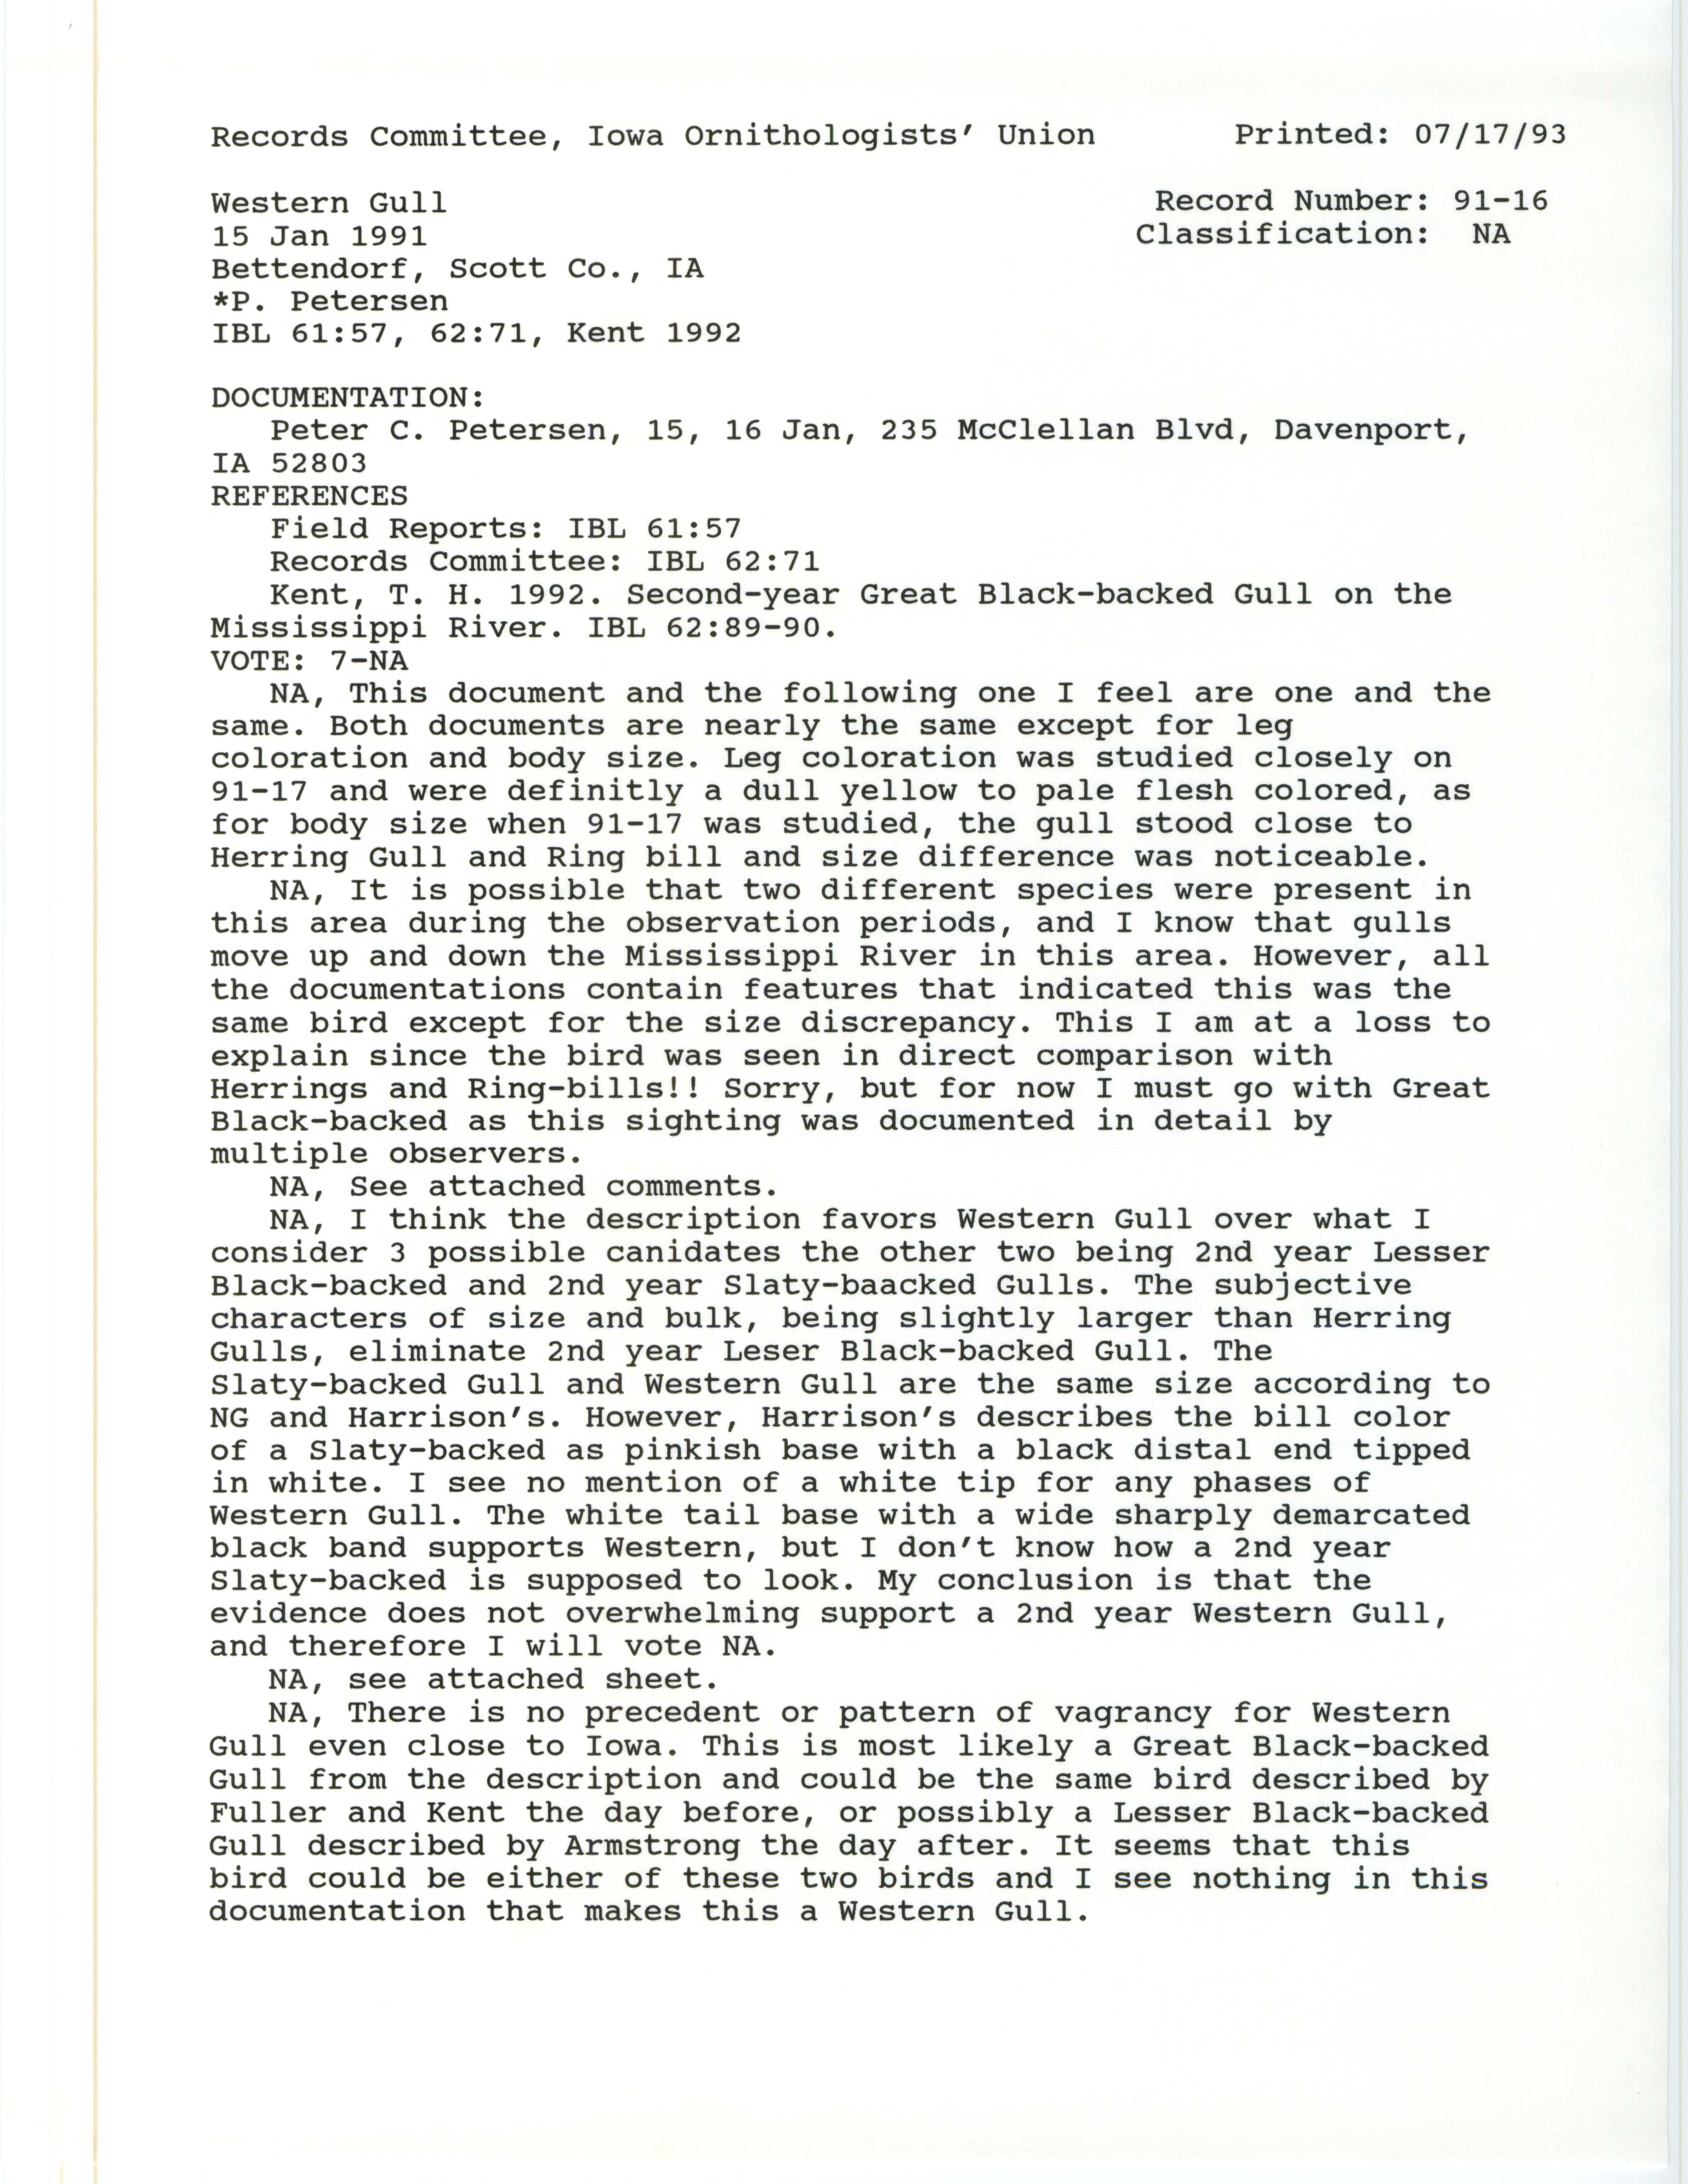 Records Committee review for rare bird sighting of Western Gull near Ben Butterworth Parkway, 1991